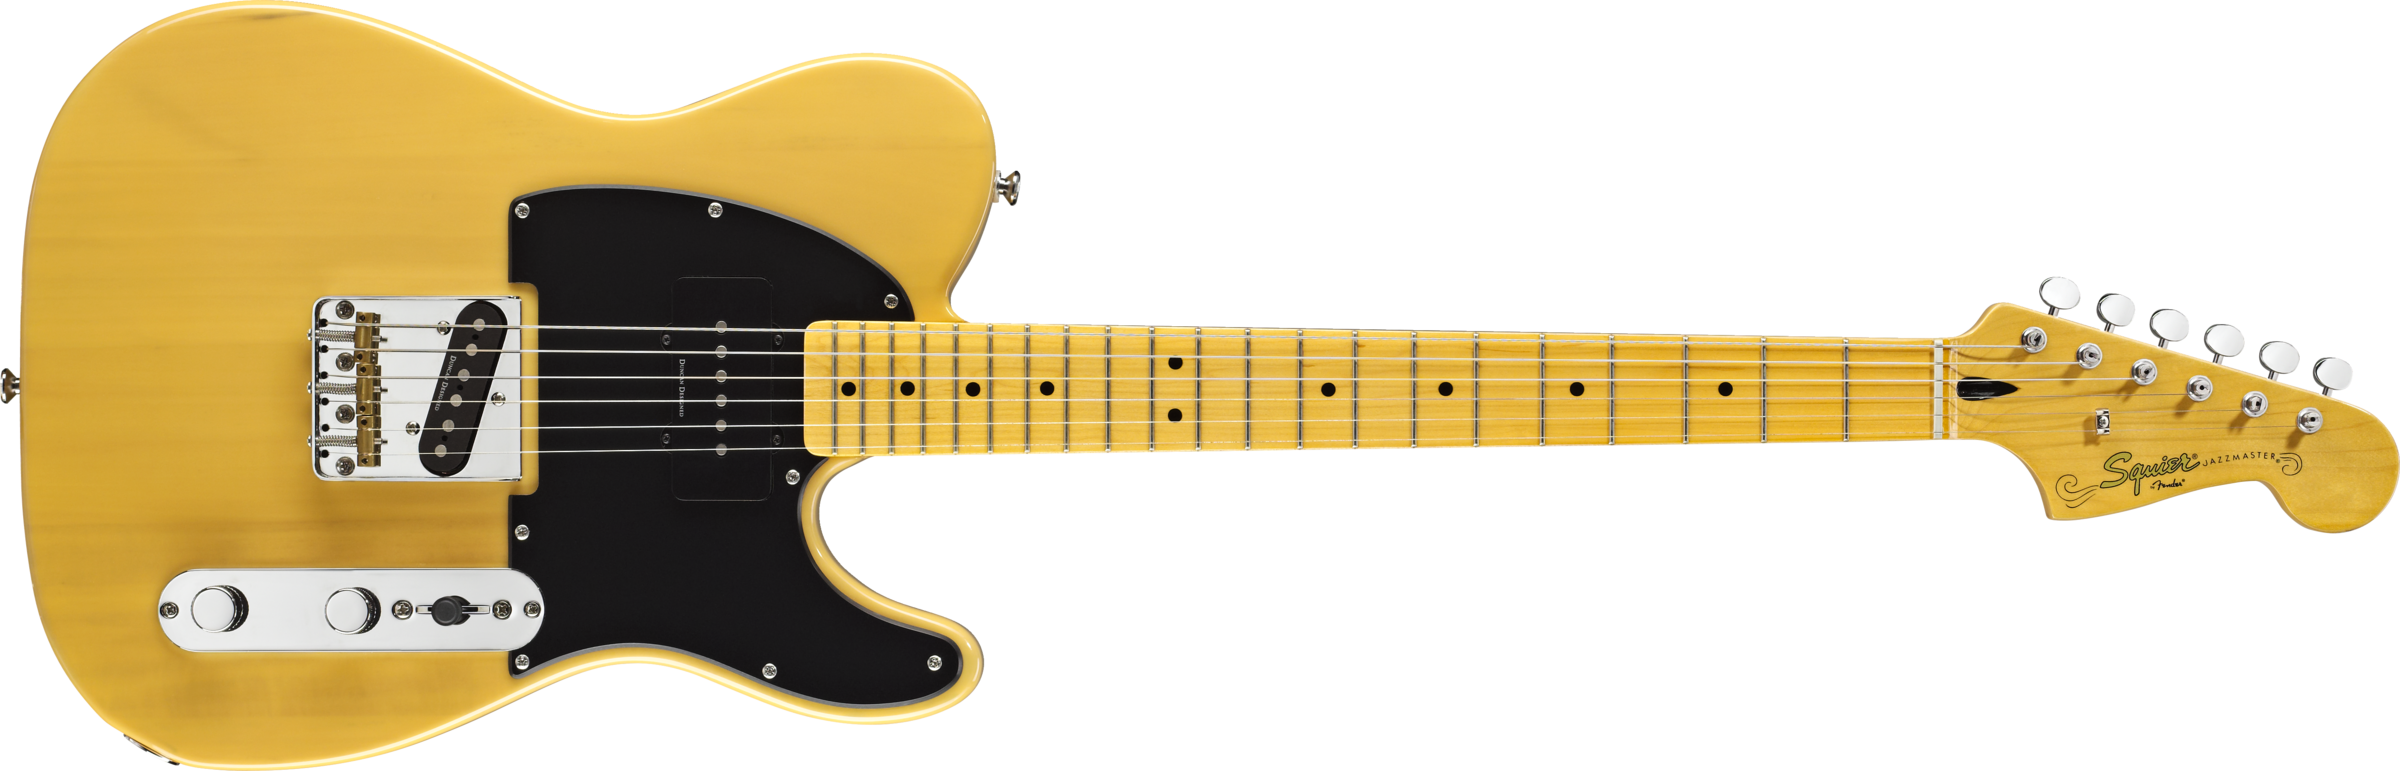 squier image .png